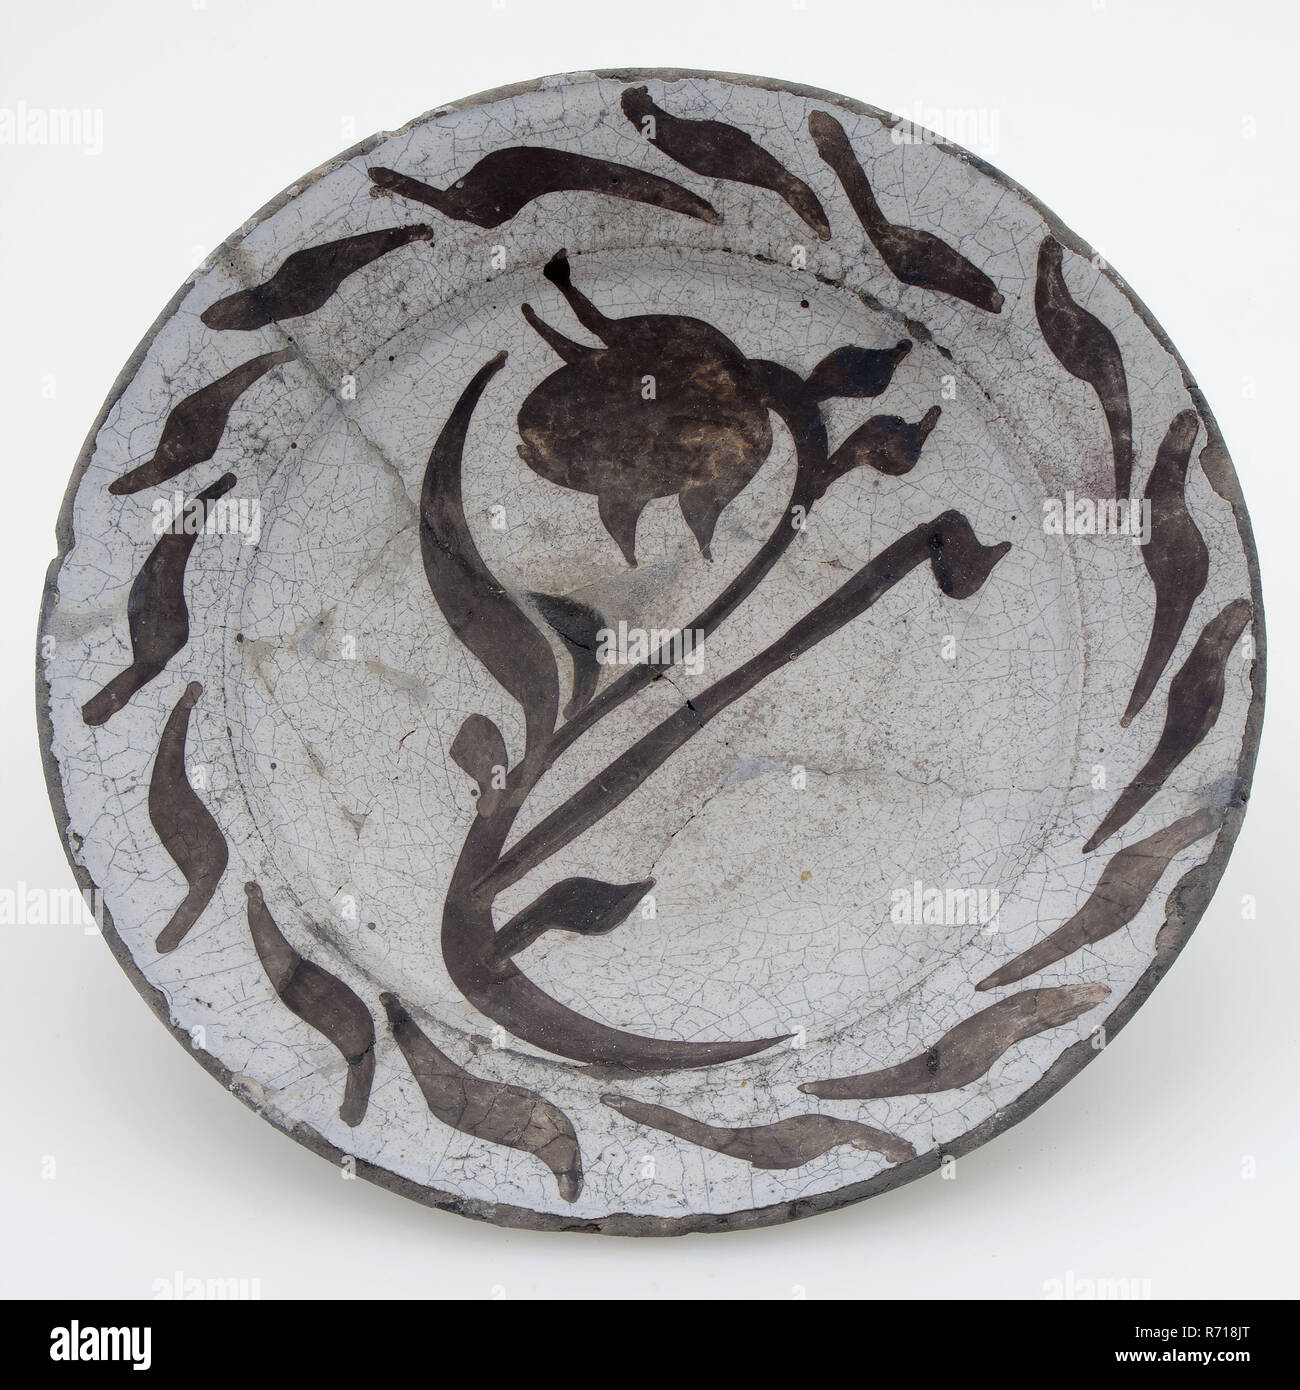 Pottery plate, decorated with plant in purple on white ground, plate dish crockery holder soil find ceramic earthenware glaze tin glaze, hand turned glazed baked Pottery plate decorated with stylized plant in purple on white fond. Decoration consists of flowering plant in the middle of the plate. Around it wreath of leaves on the edge. Plate is fully glazed. Stand with light soul archeology Rotterdam Overschie Kleinpolder Polderkade indigenous pottery served table food room table Ground discovery: Overschie 1979 De Lugt at the Polderkade. Stock Photo